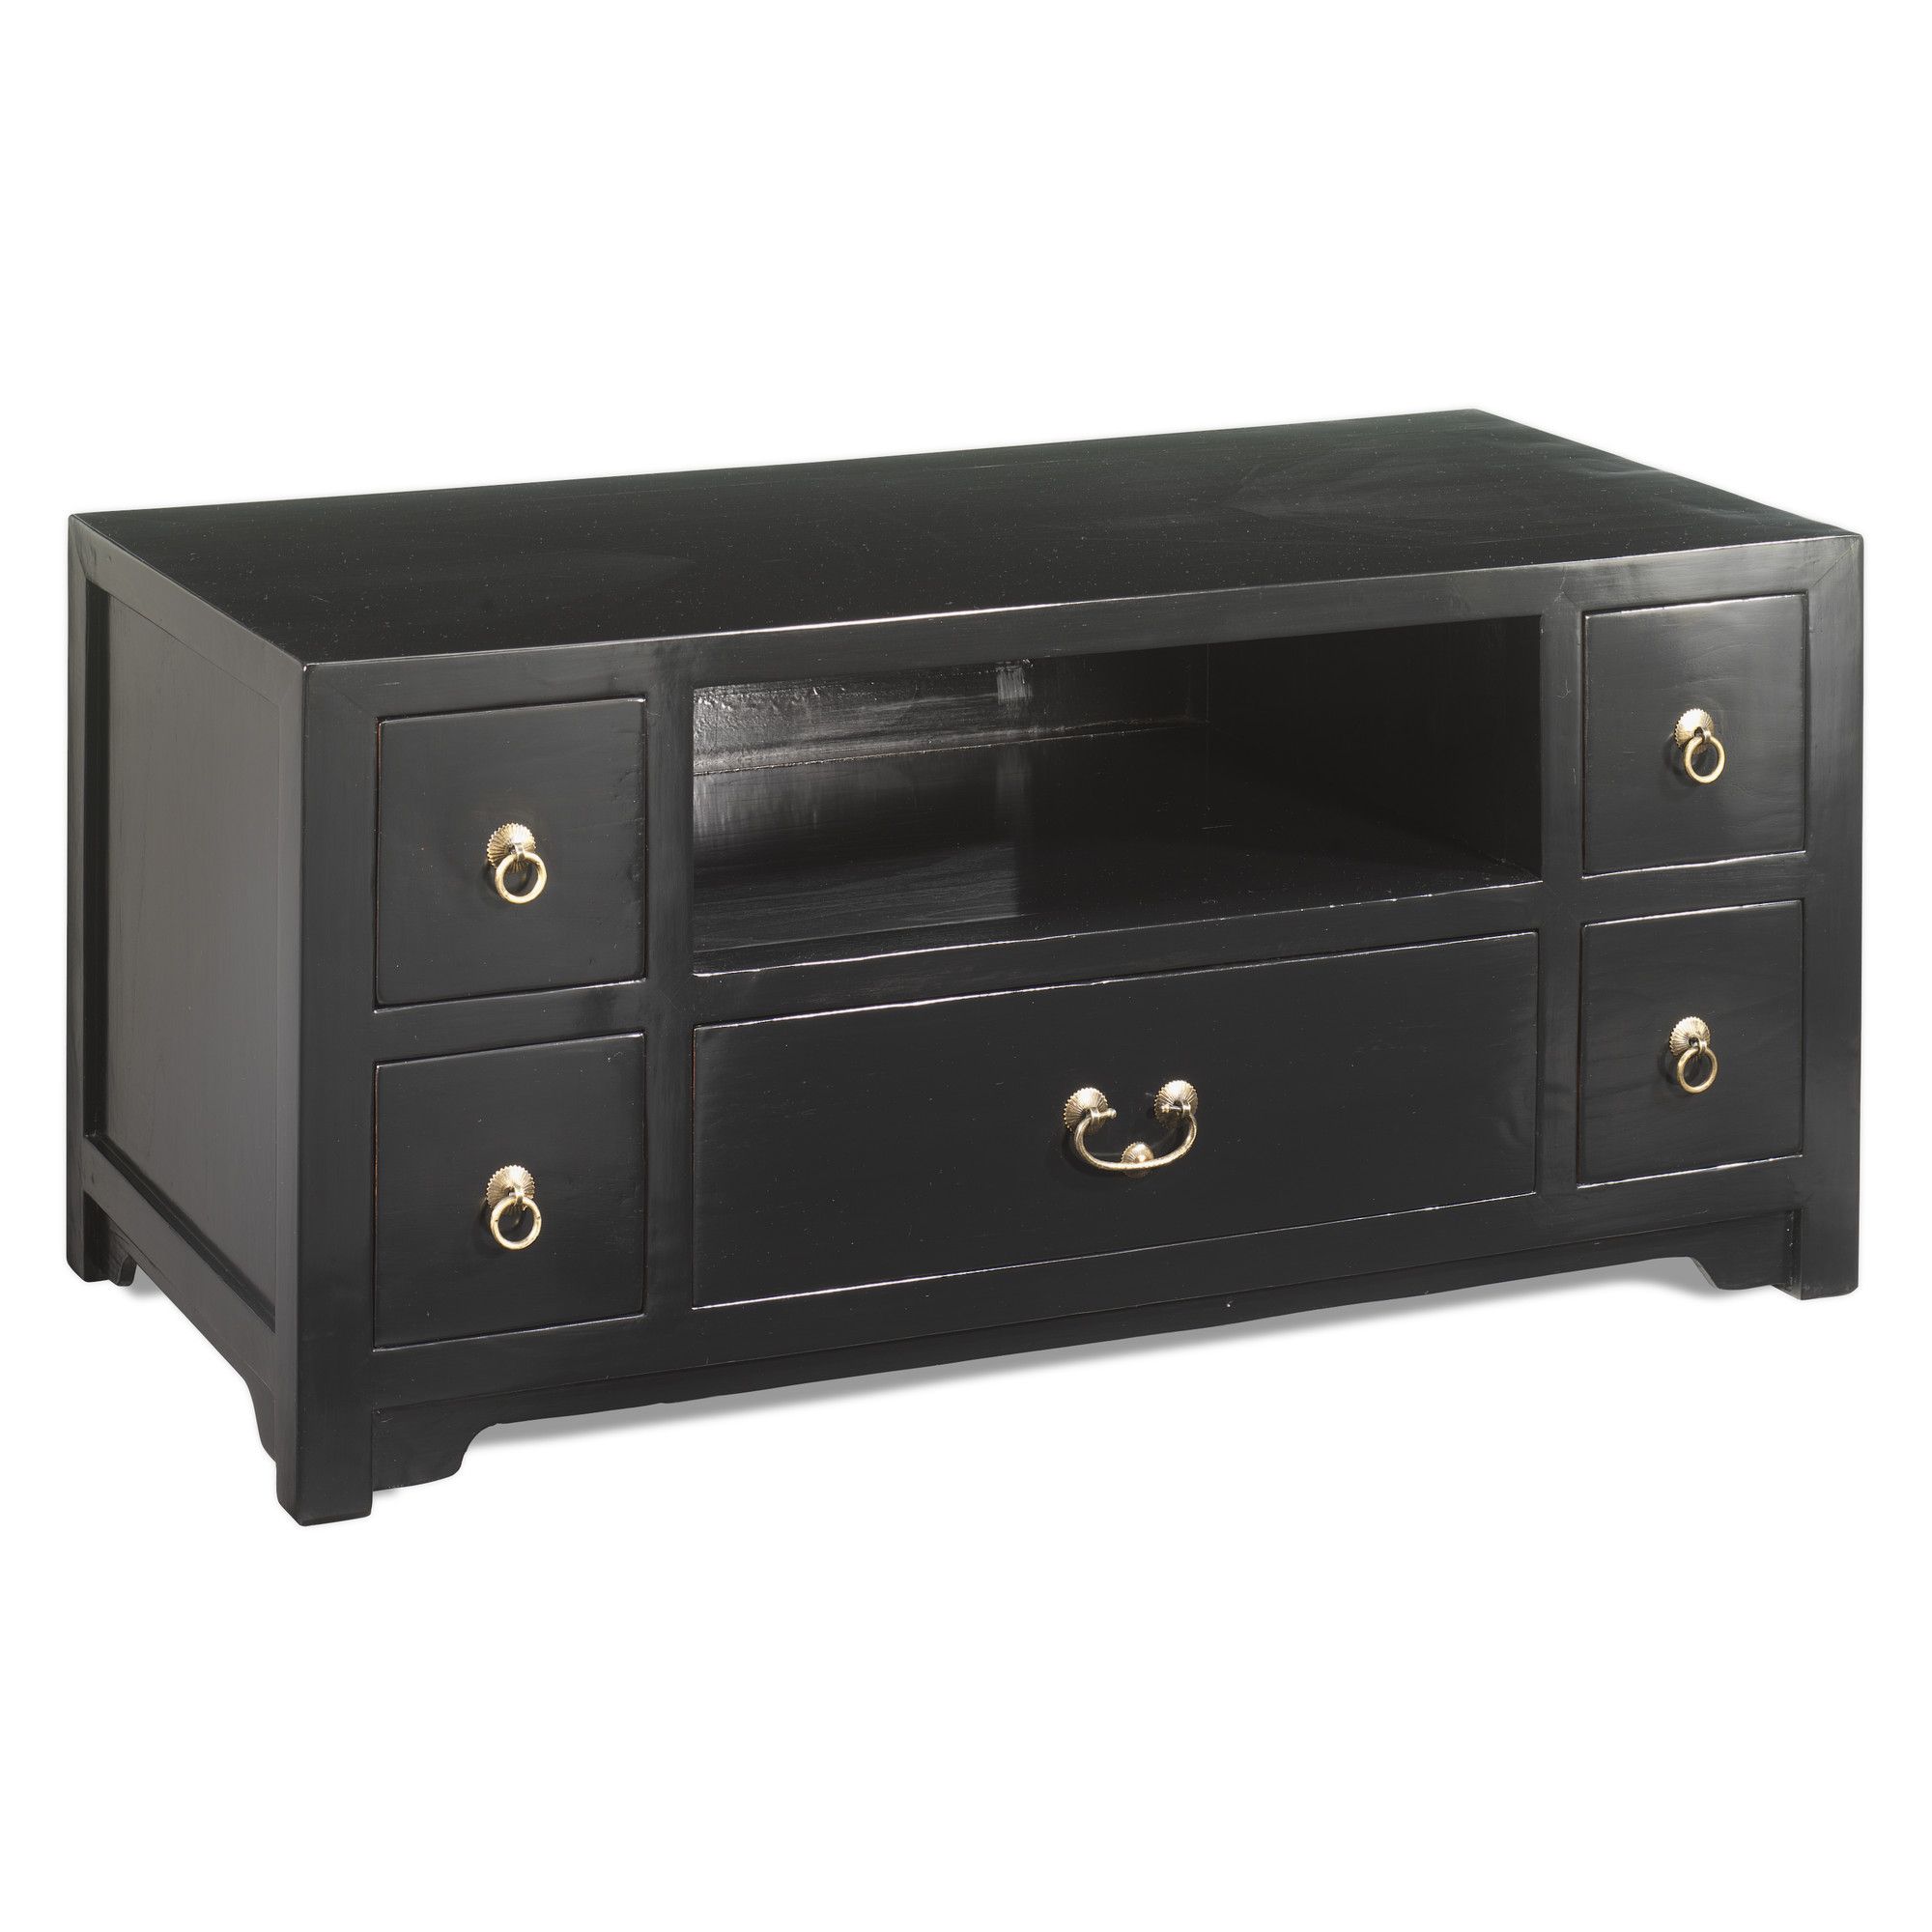 Shimu Chinese Classical Low Kang TV Unit - Black Lacquer at Tesco Direct